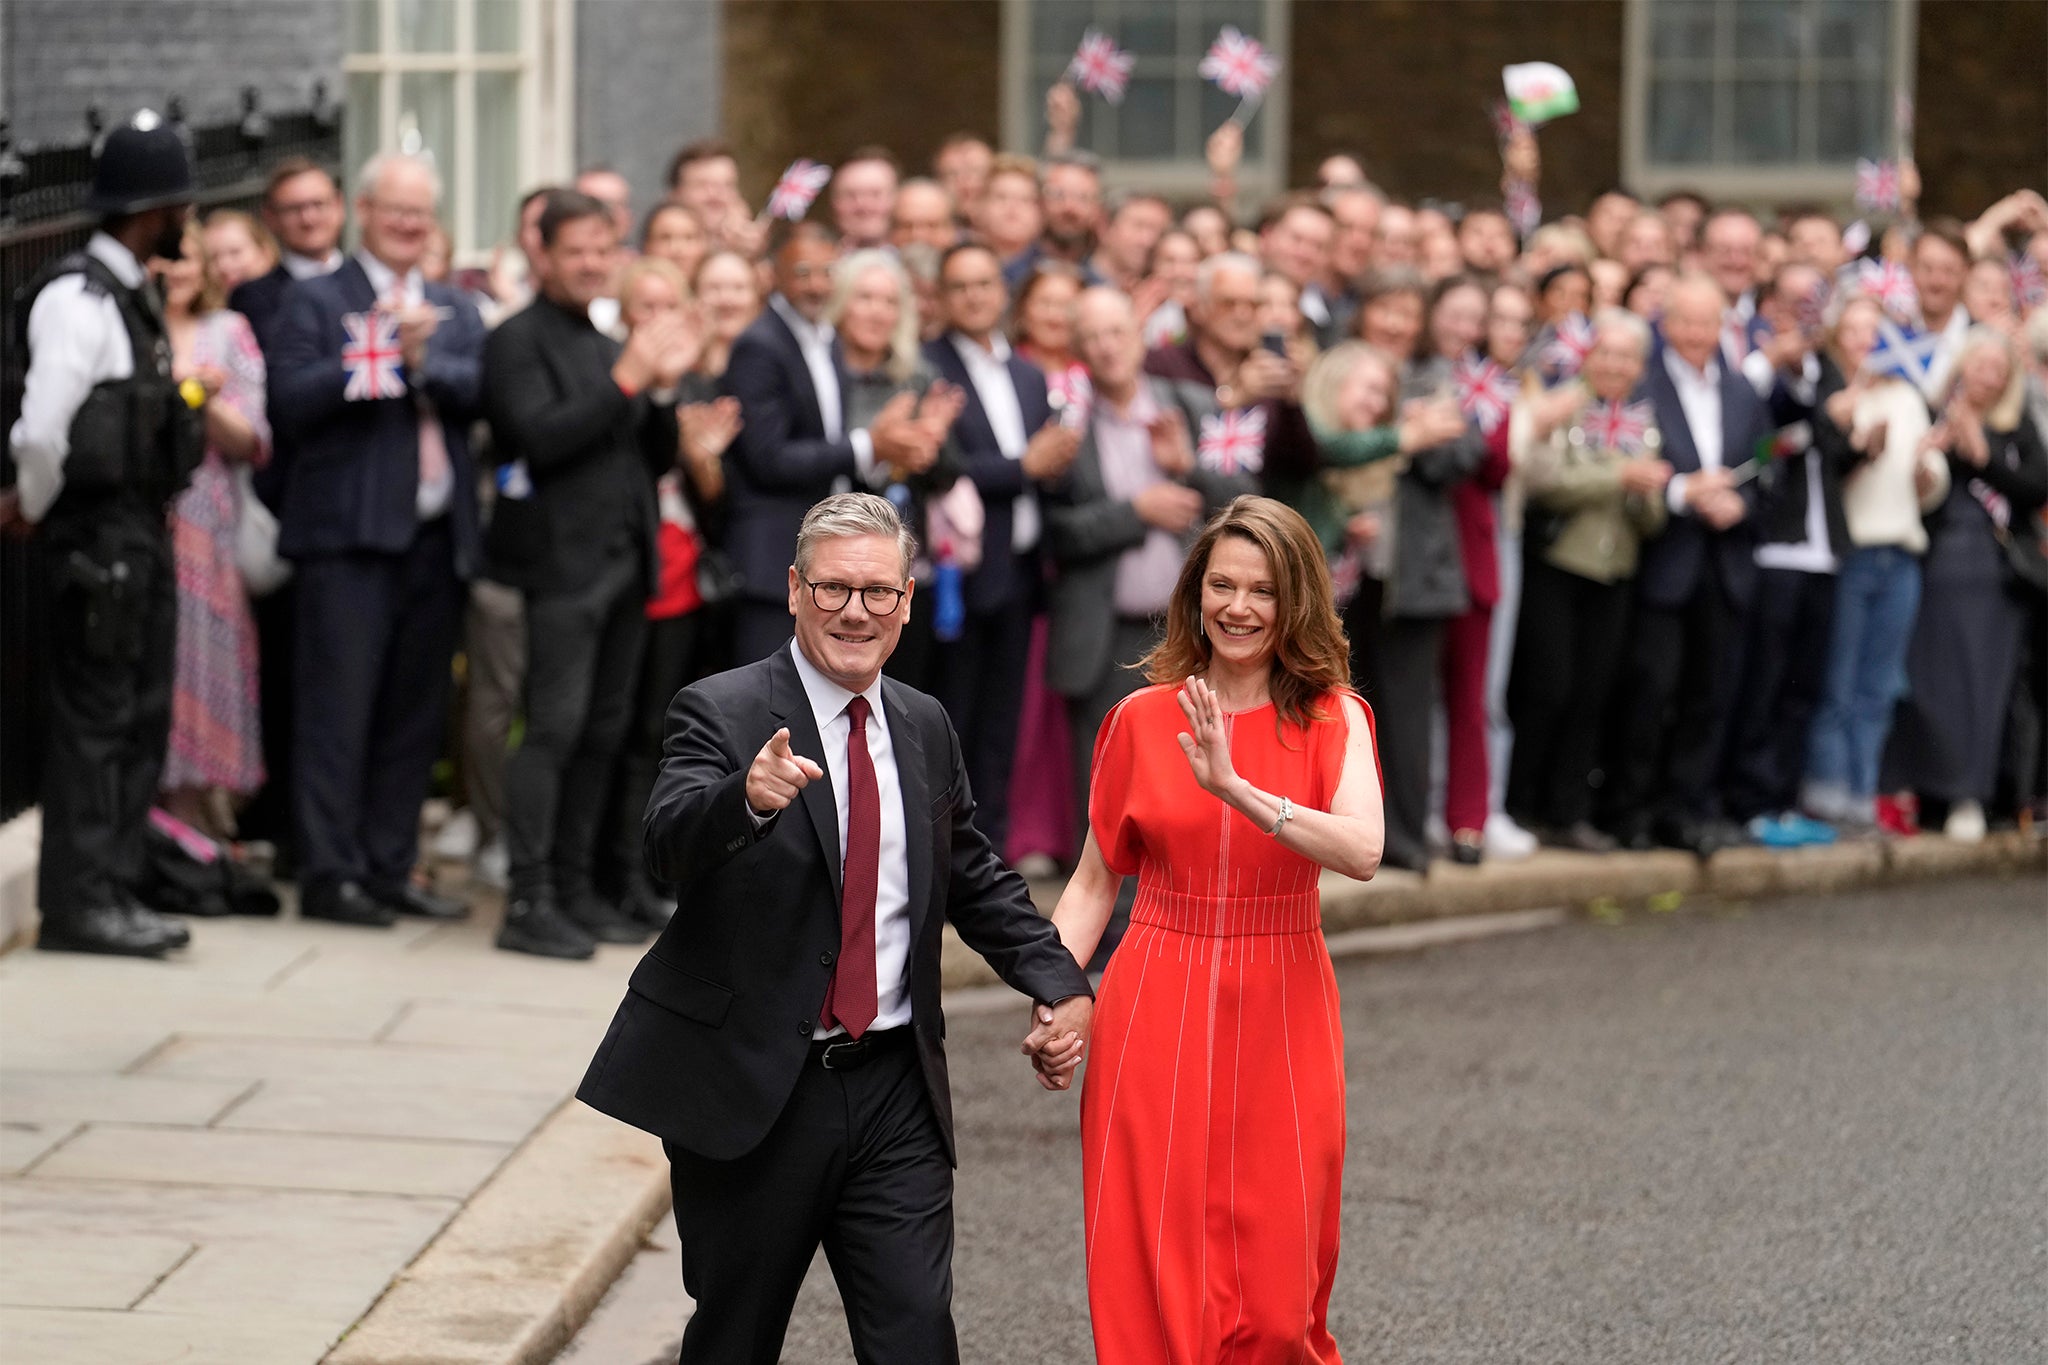 ‘Beaming from ear to ear, Starmer strolled up and down the crowd with wife Victoria while the cheers rang out’